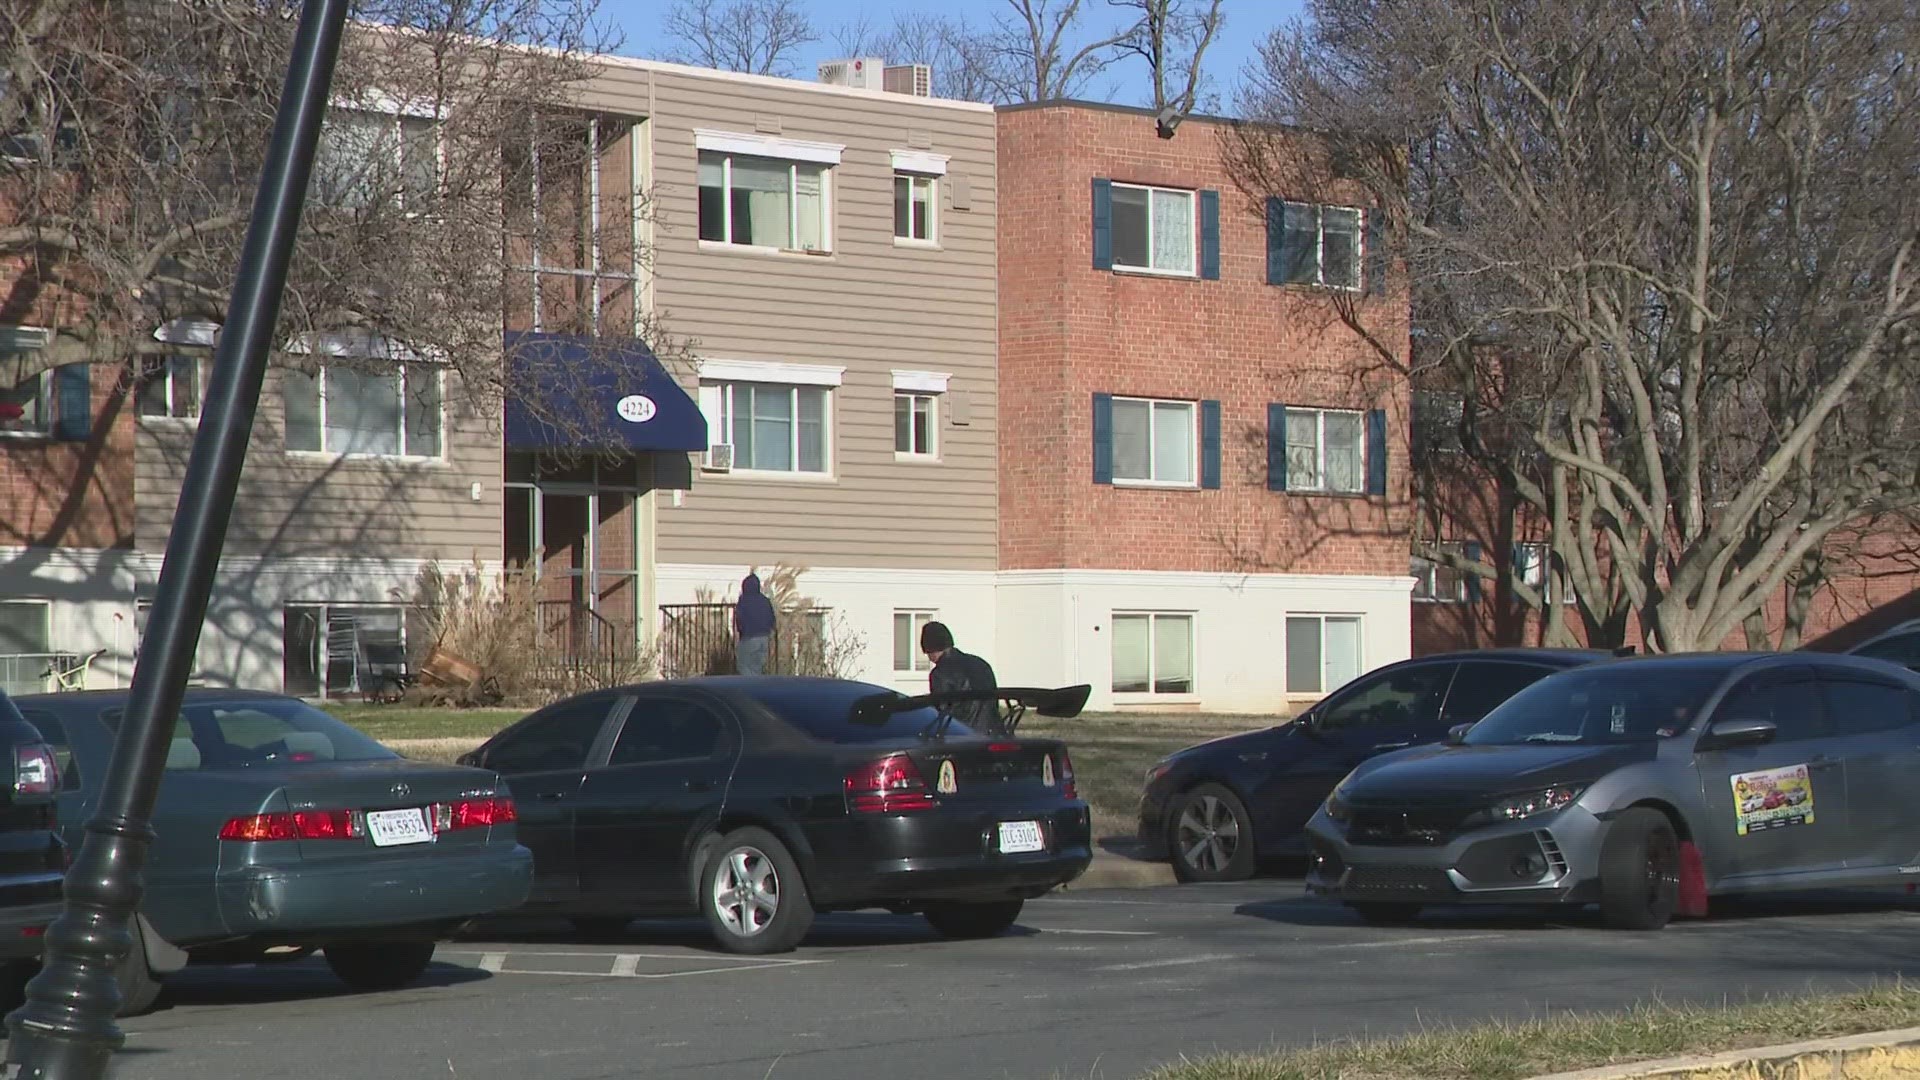 A 14-year-old boy is in custody related to the stabbing but has yet to be charged.